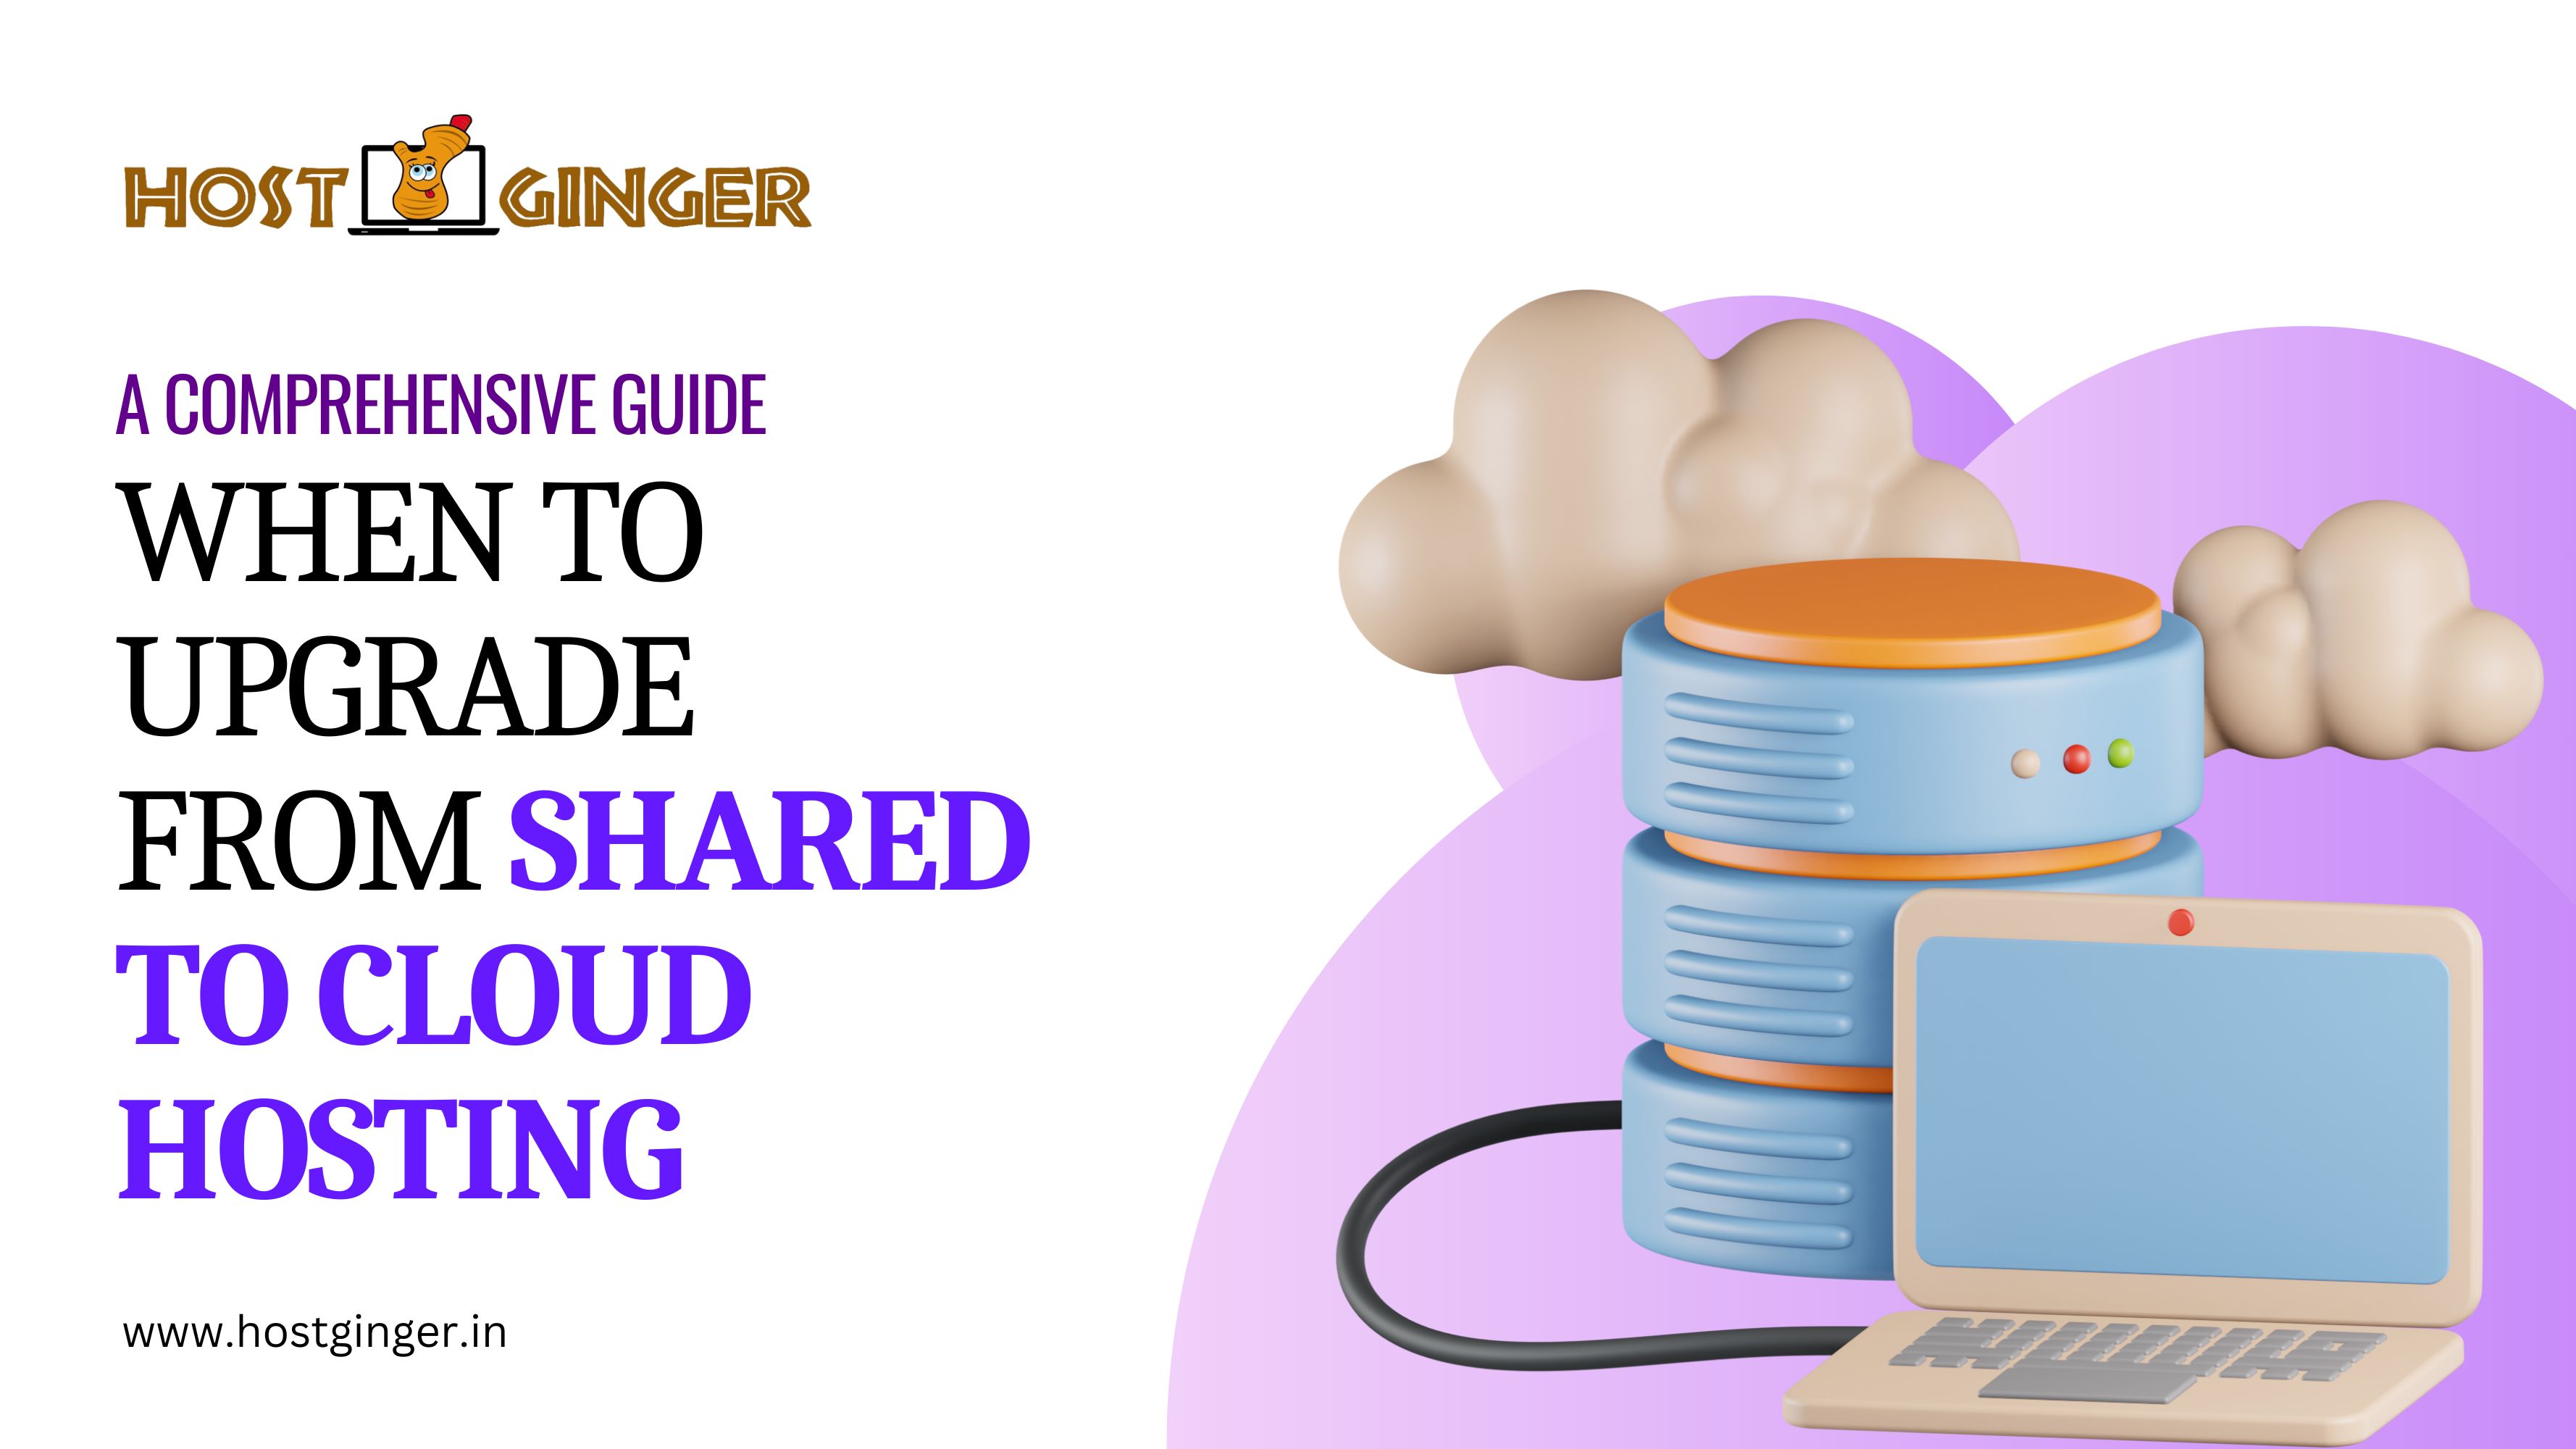 When to Upgrade from Shared to Cloud Hosting